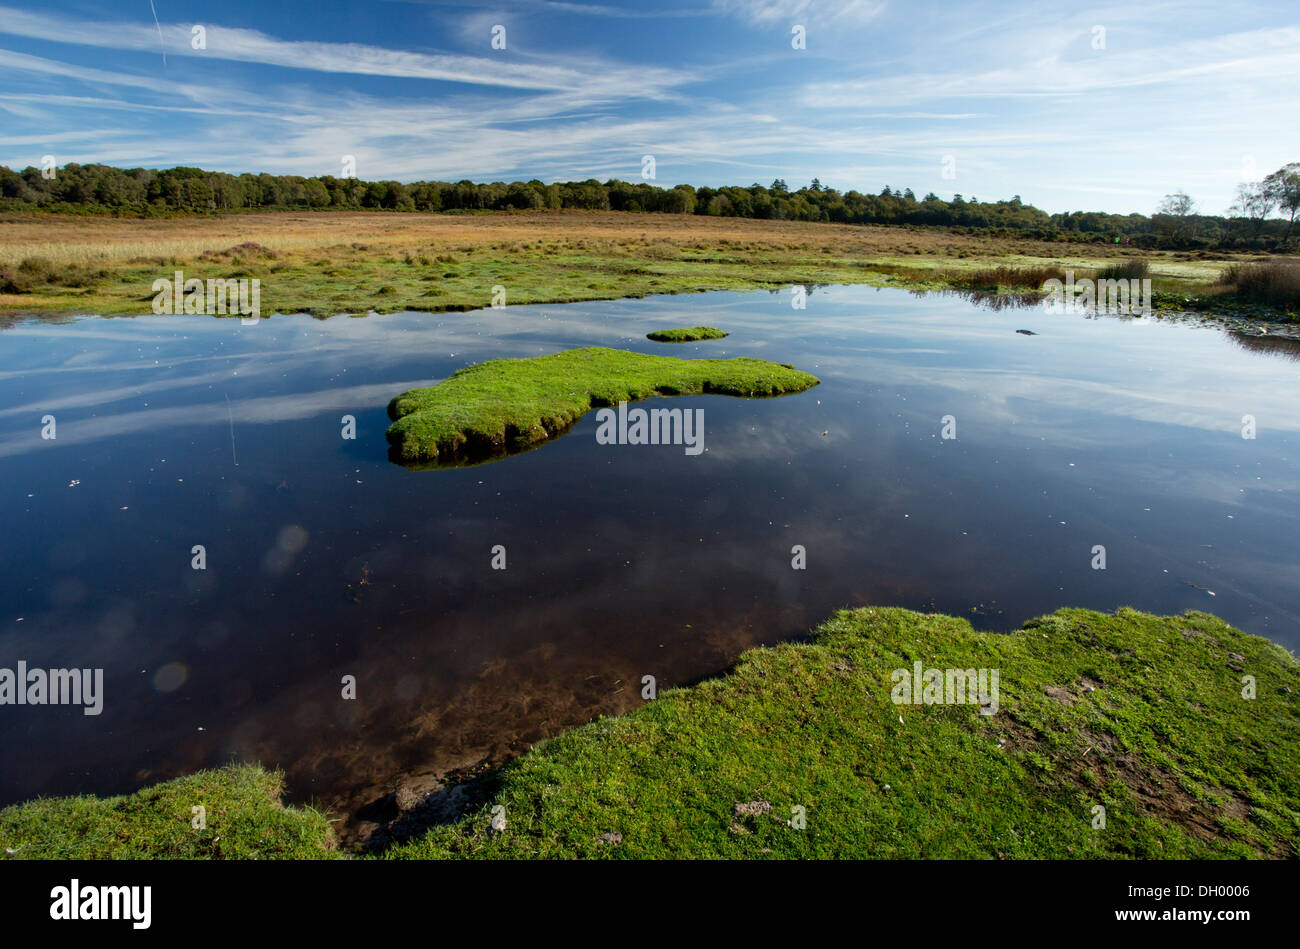 A biodiverse New Forest Pond, Chubbs Farm Pond, near Burley, New Forest, Hampshire, England, UK Stock Photo